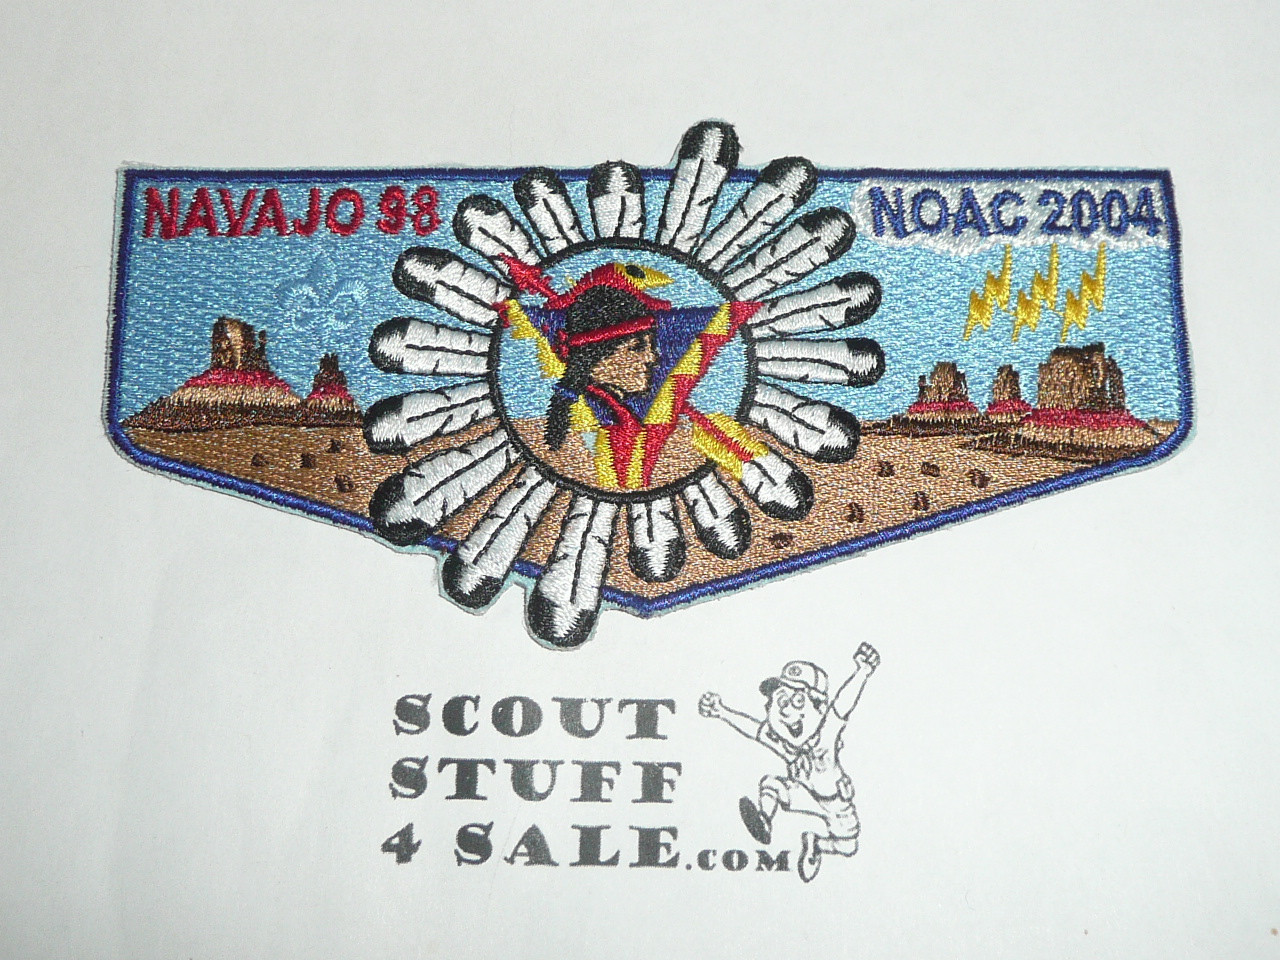 Order of the Arrow Lodge #98 Navajo s65 2004 NOAC Flap Patch